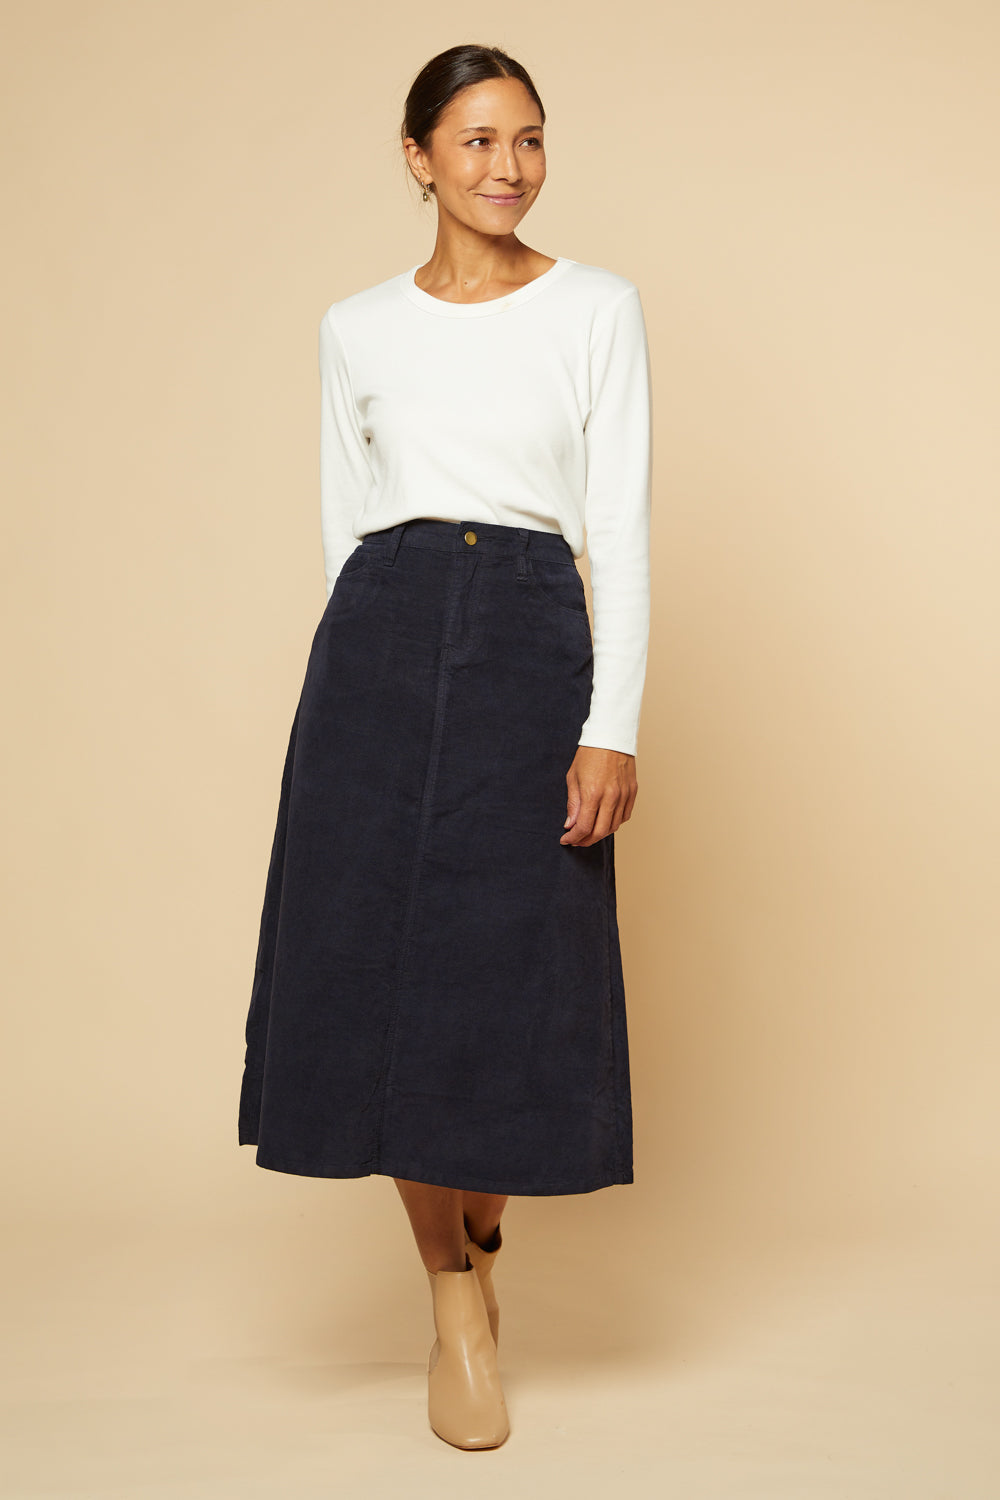 Adrift A-Line Brushed Cotton Skirt in Navy